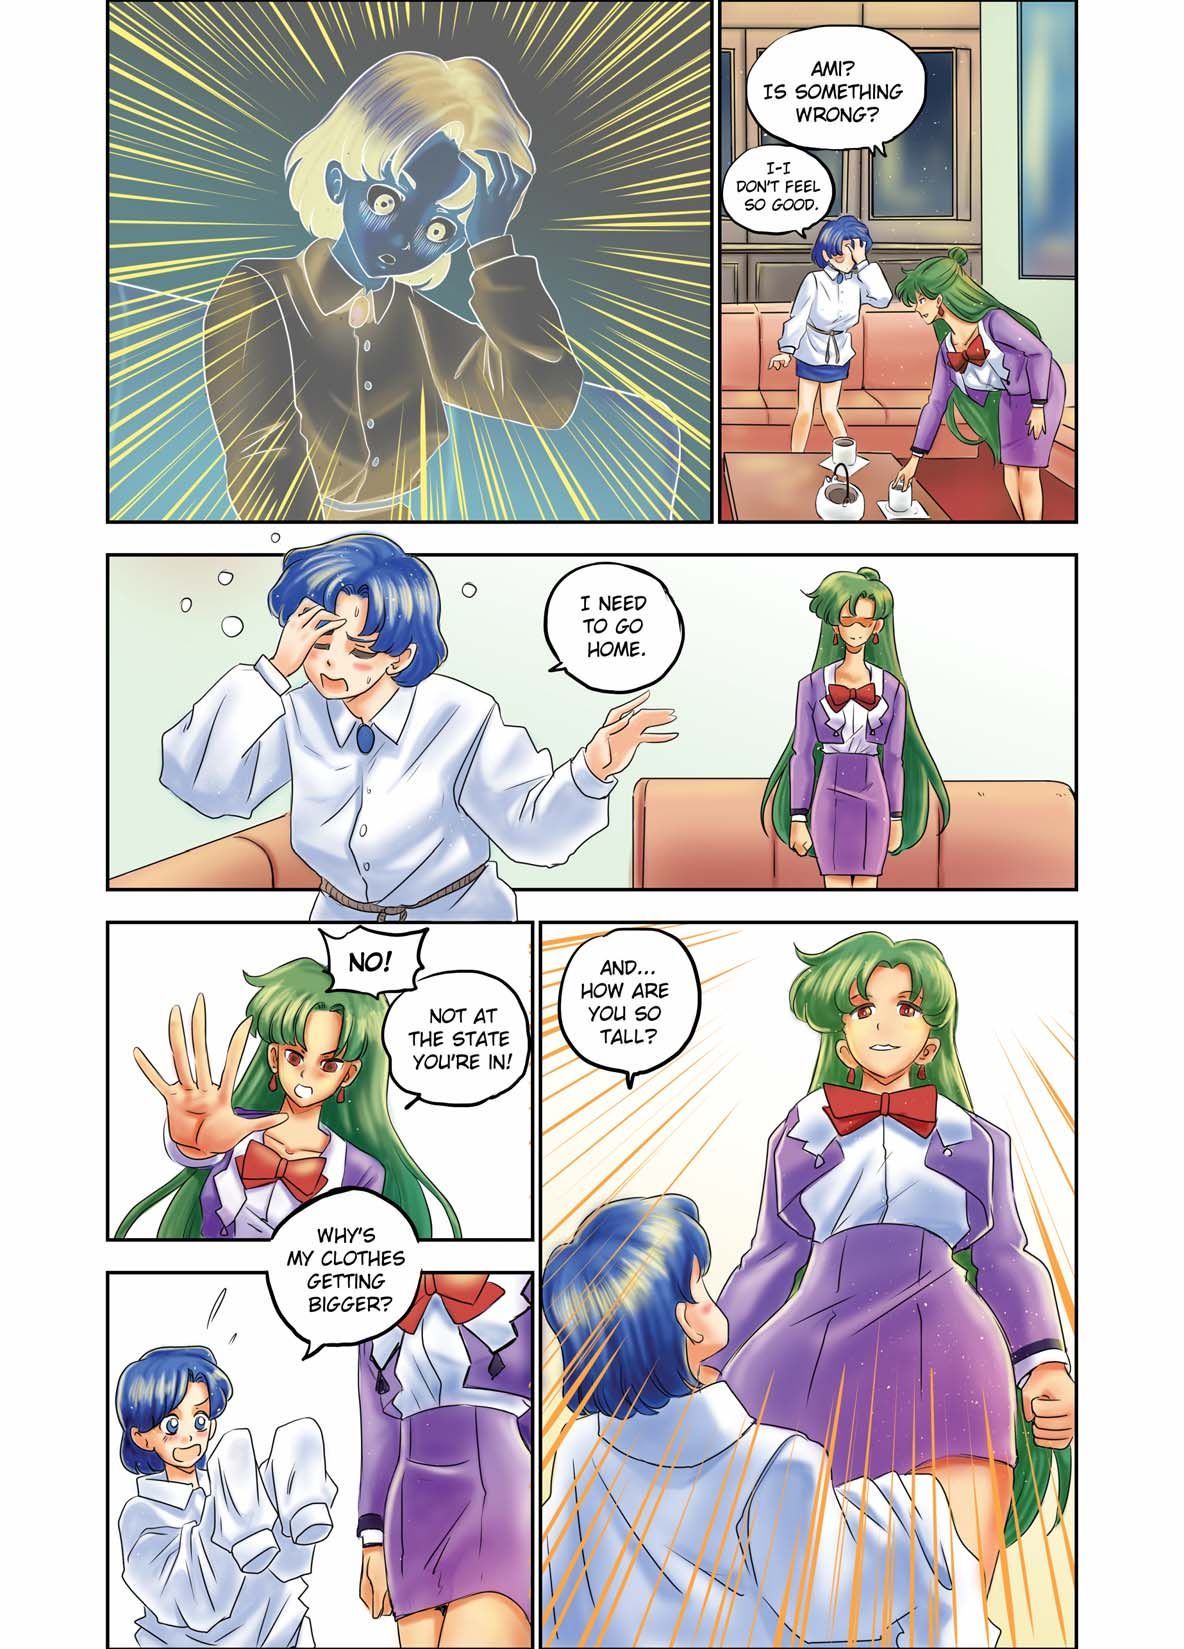 The Senshi Dolls Day One (Sailor Moon) by Mercurius page 5